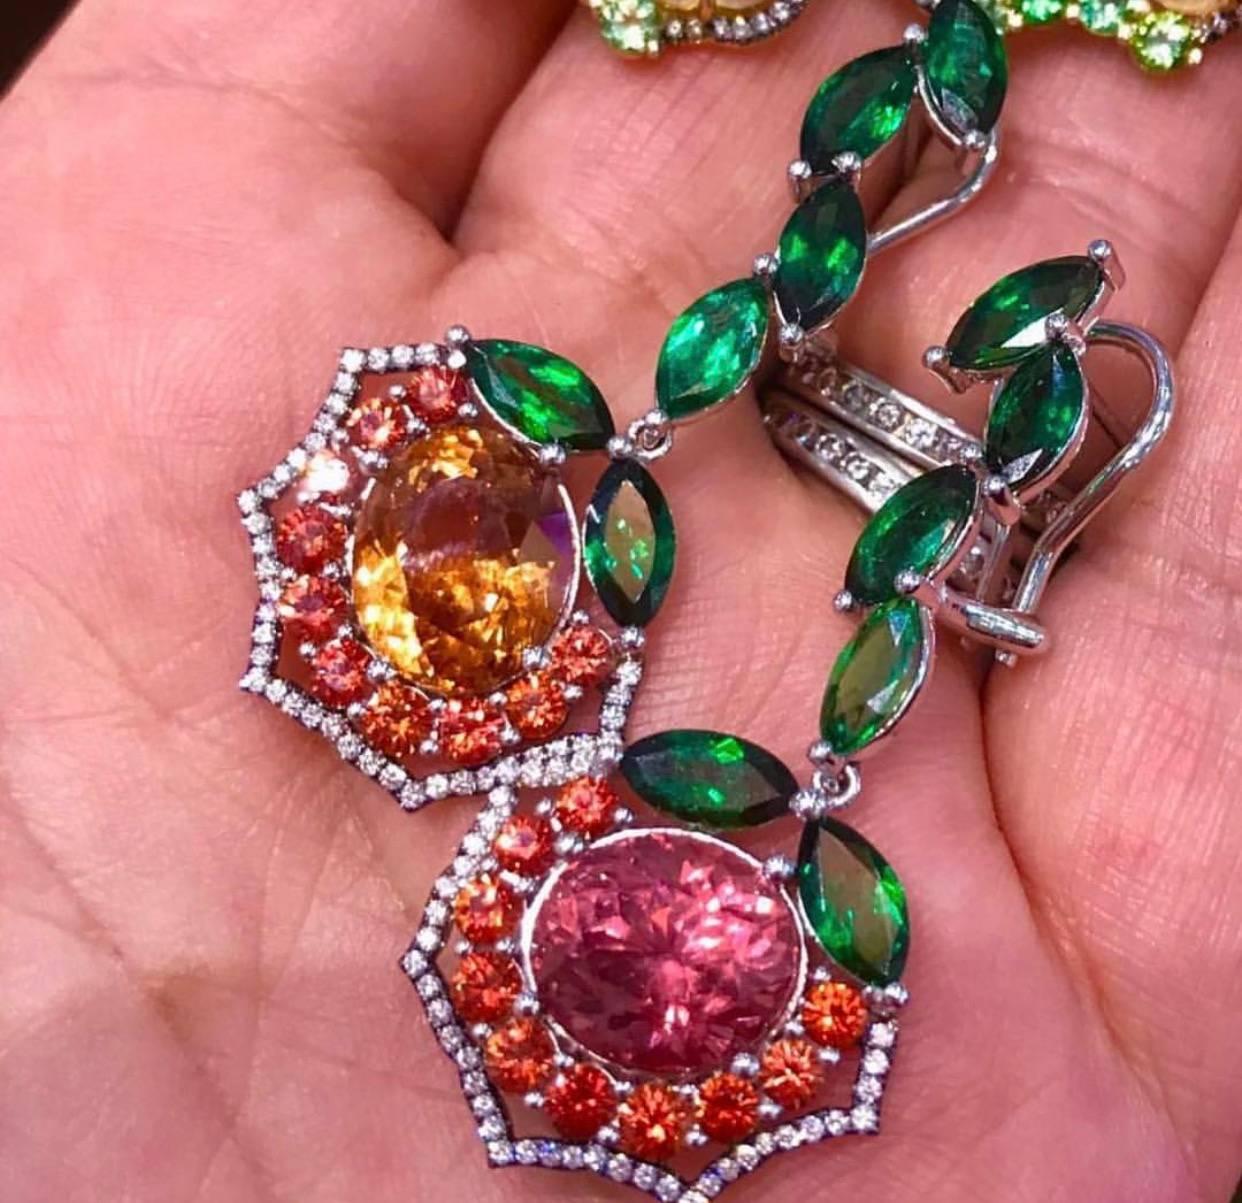 18 K White gold earrings have very rare in color and size: Malaya Garnets, from Tanzania, Pink and Peach oval gems are perfectly match by cut and size, and two colors do compliment each other, they sparkle like only Garnets can. Accented with Marque